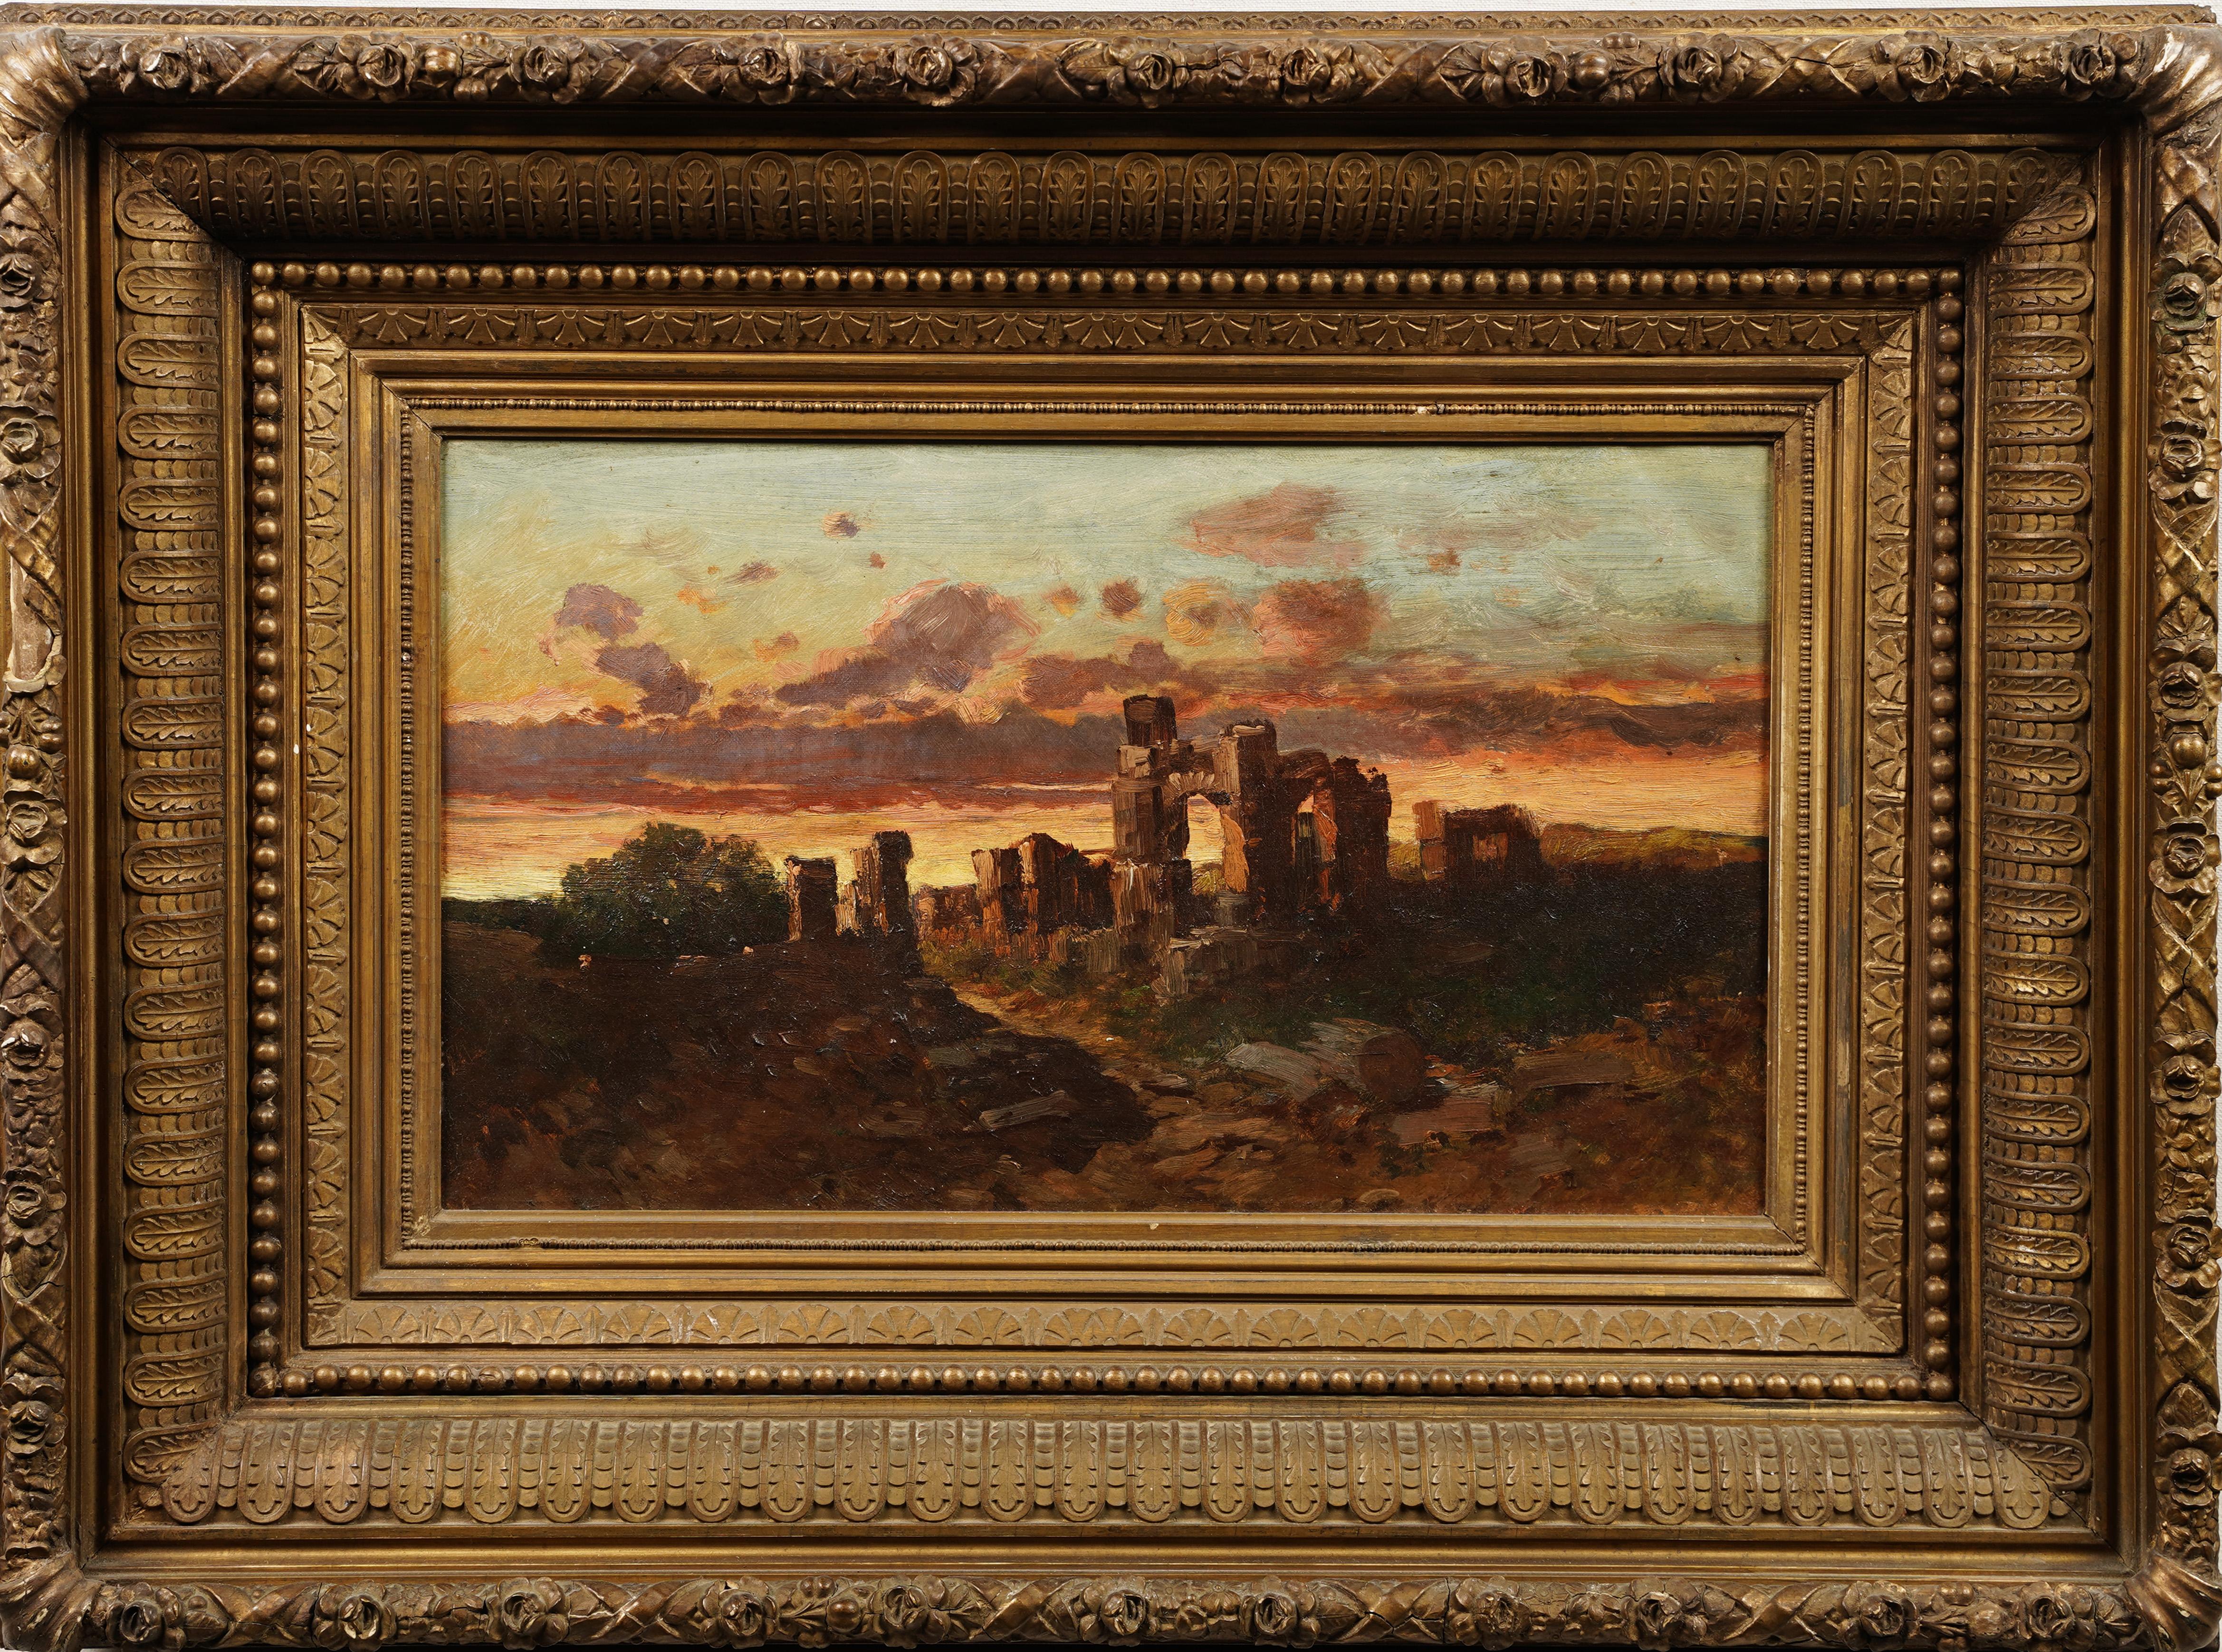 Important framed 19th century Hudson River School landscape.  Possibly estate stamped.  Housed in an impressive period frame.  Oil on canvas.  